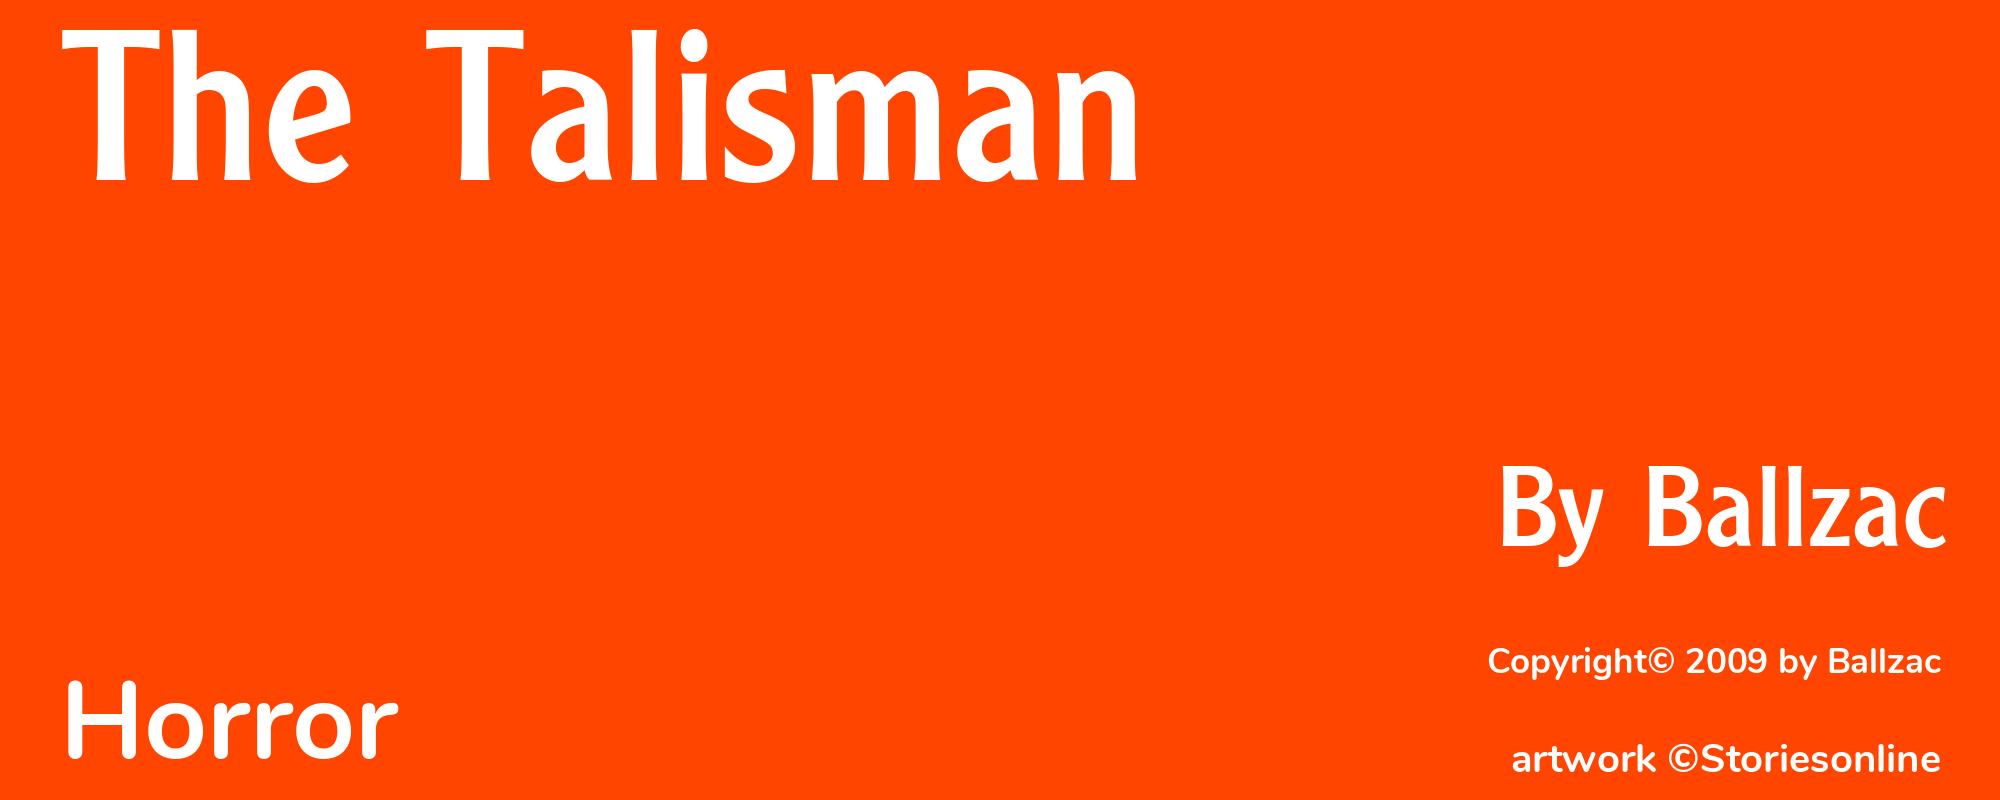 The Talisman - Cover